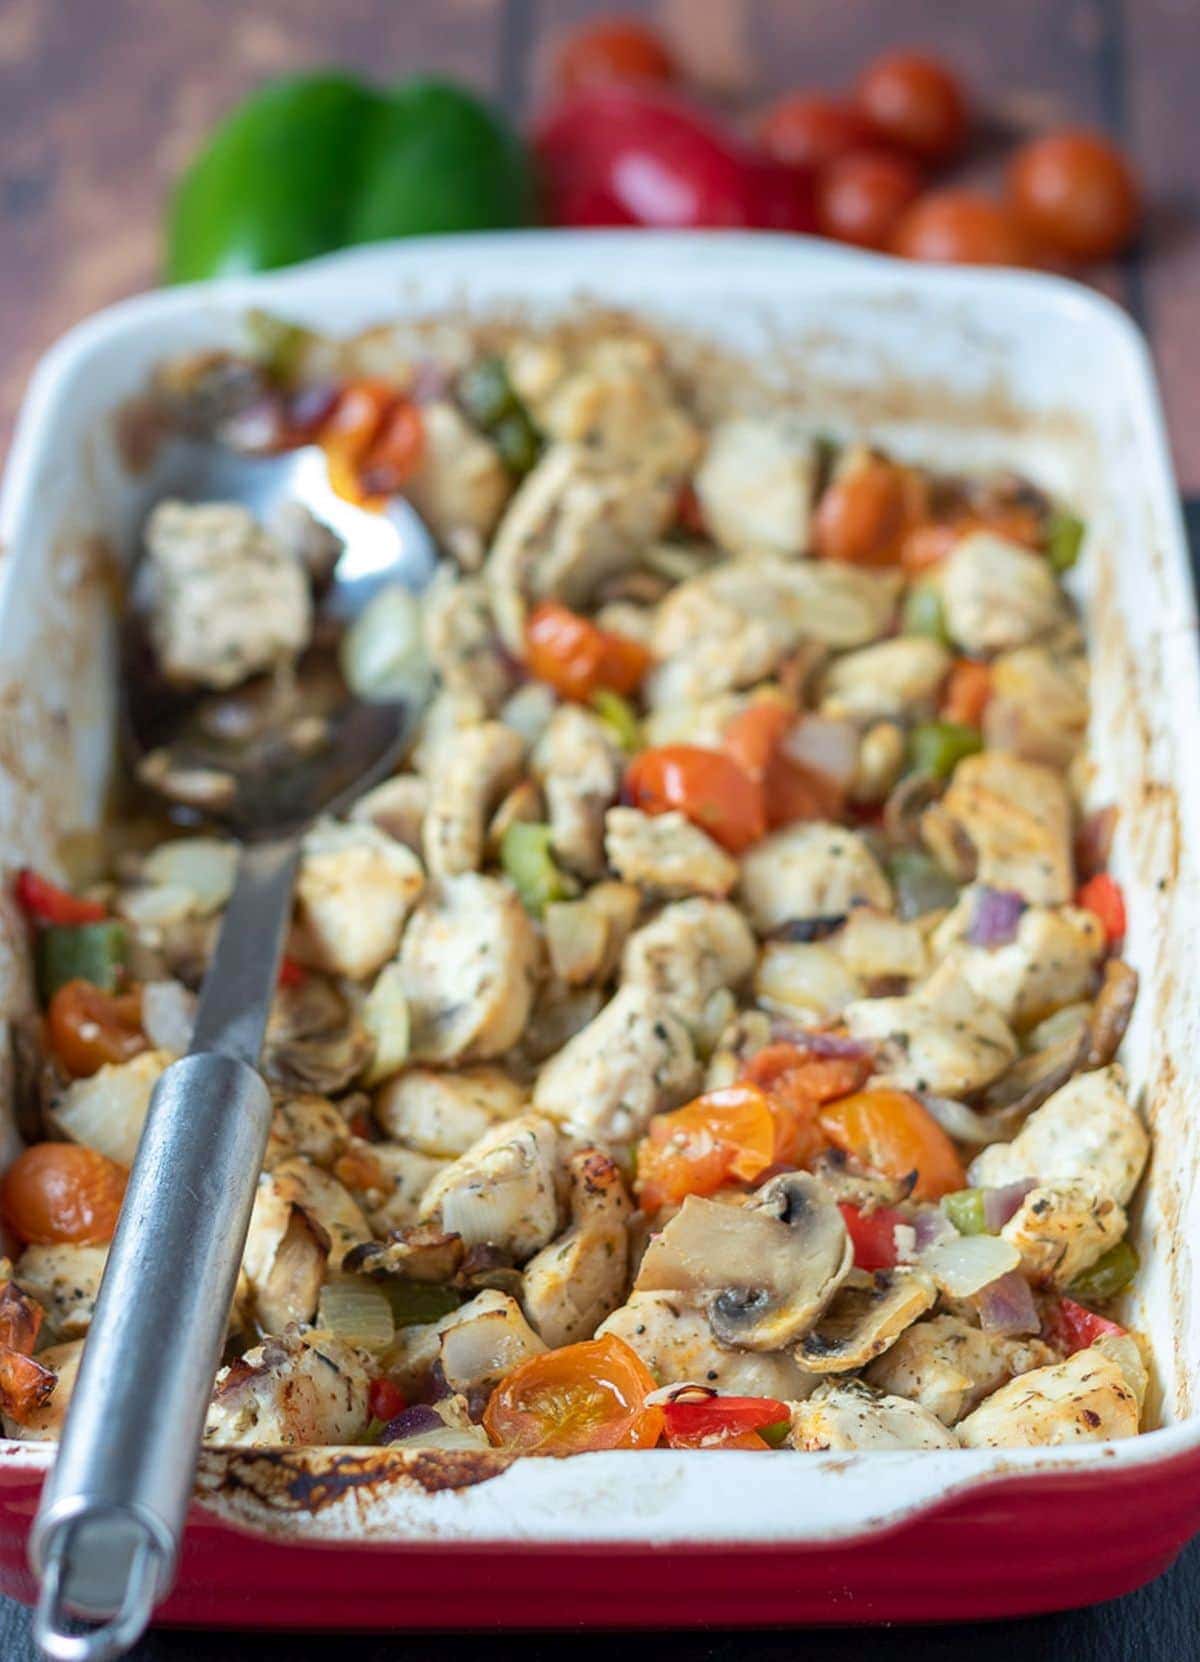 Baked chicken and mixed vegetables cooked in a stoneware serving dish with a serving spoon to the left hand side.